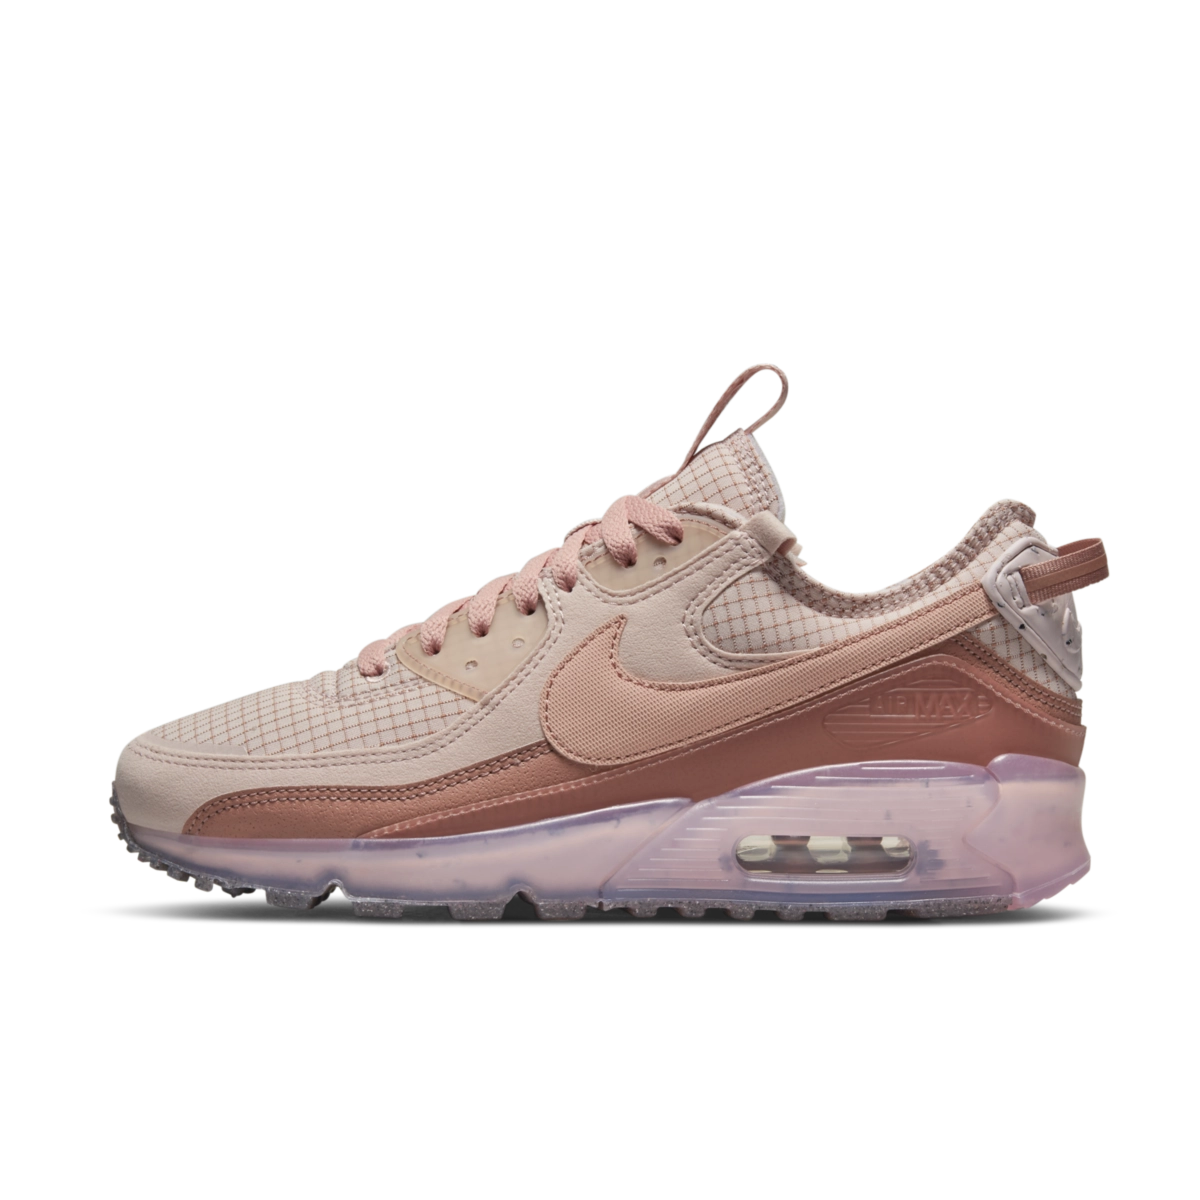 Nike Air Max 90 Terrascape WMNS 'Pink Oxford'